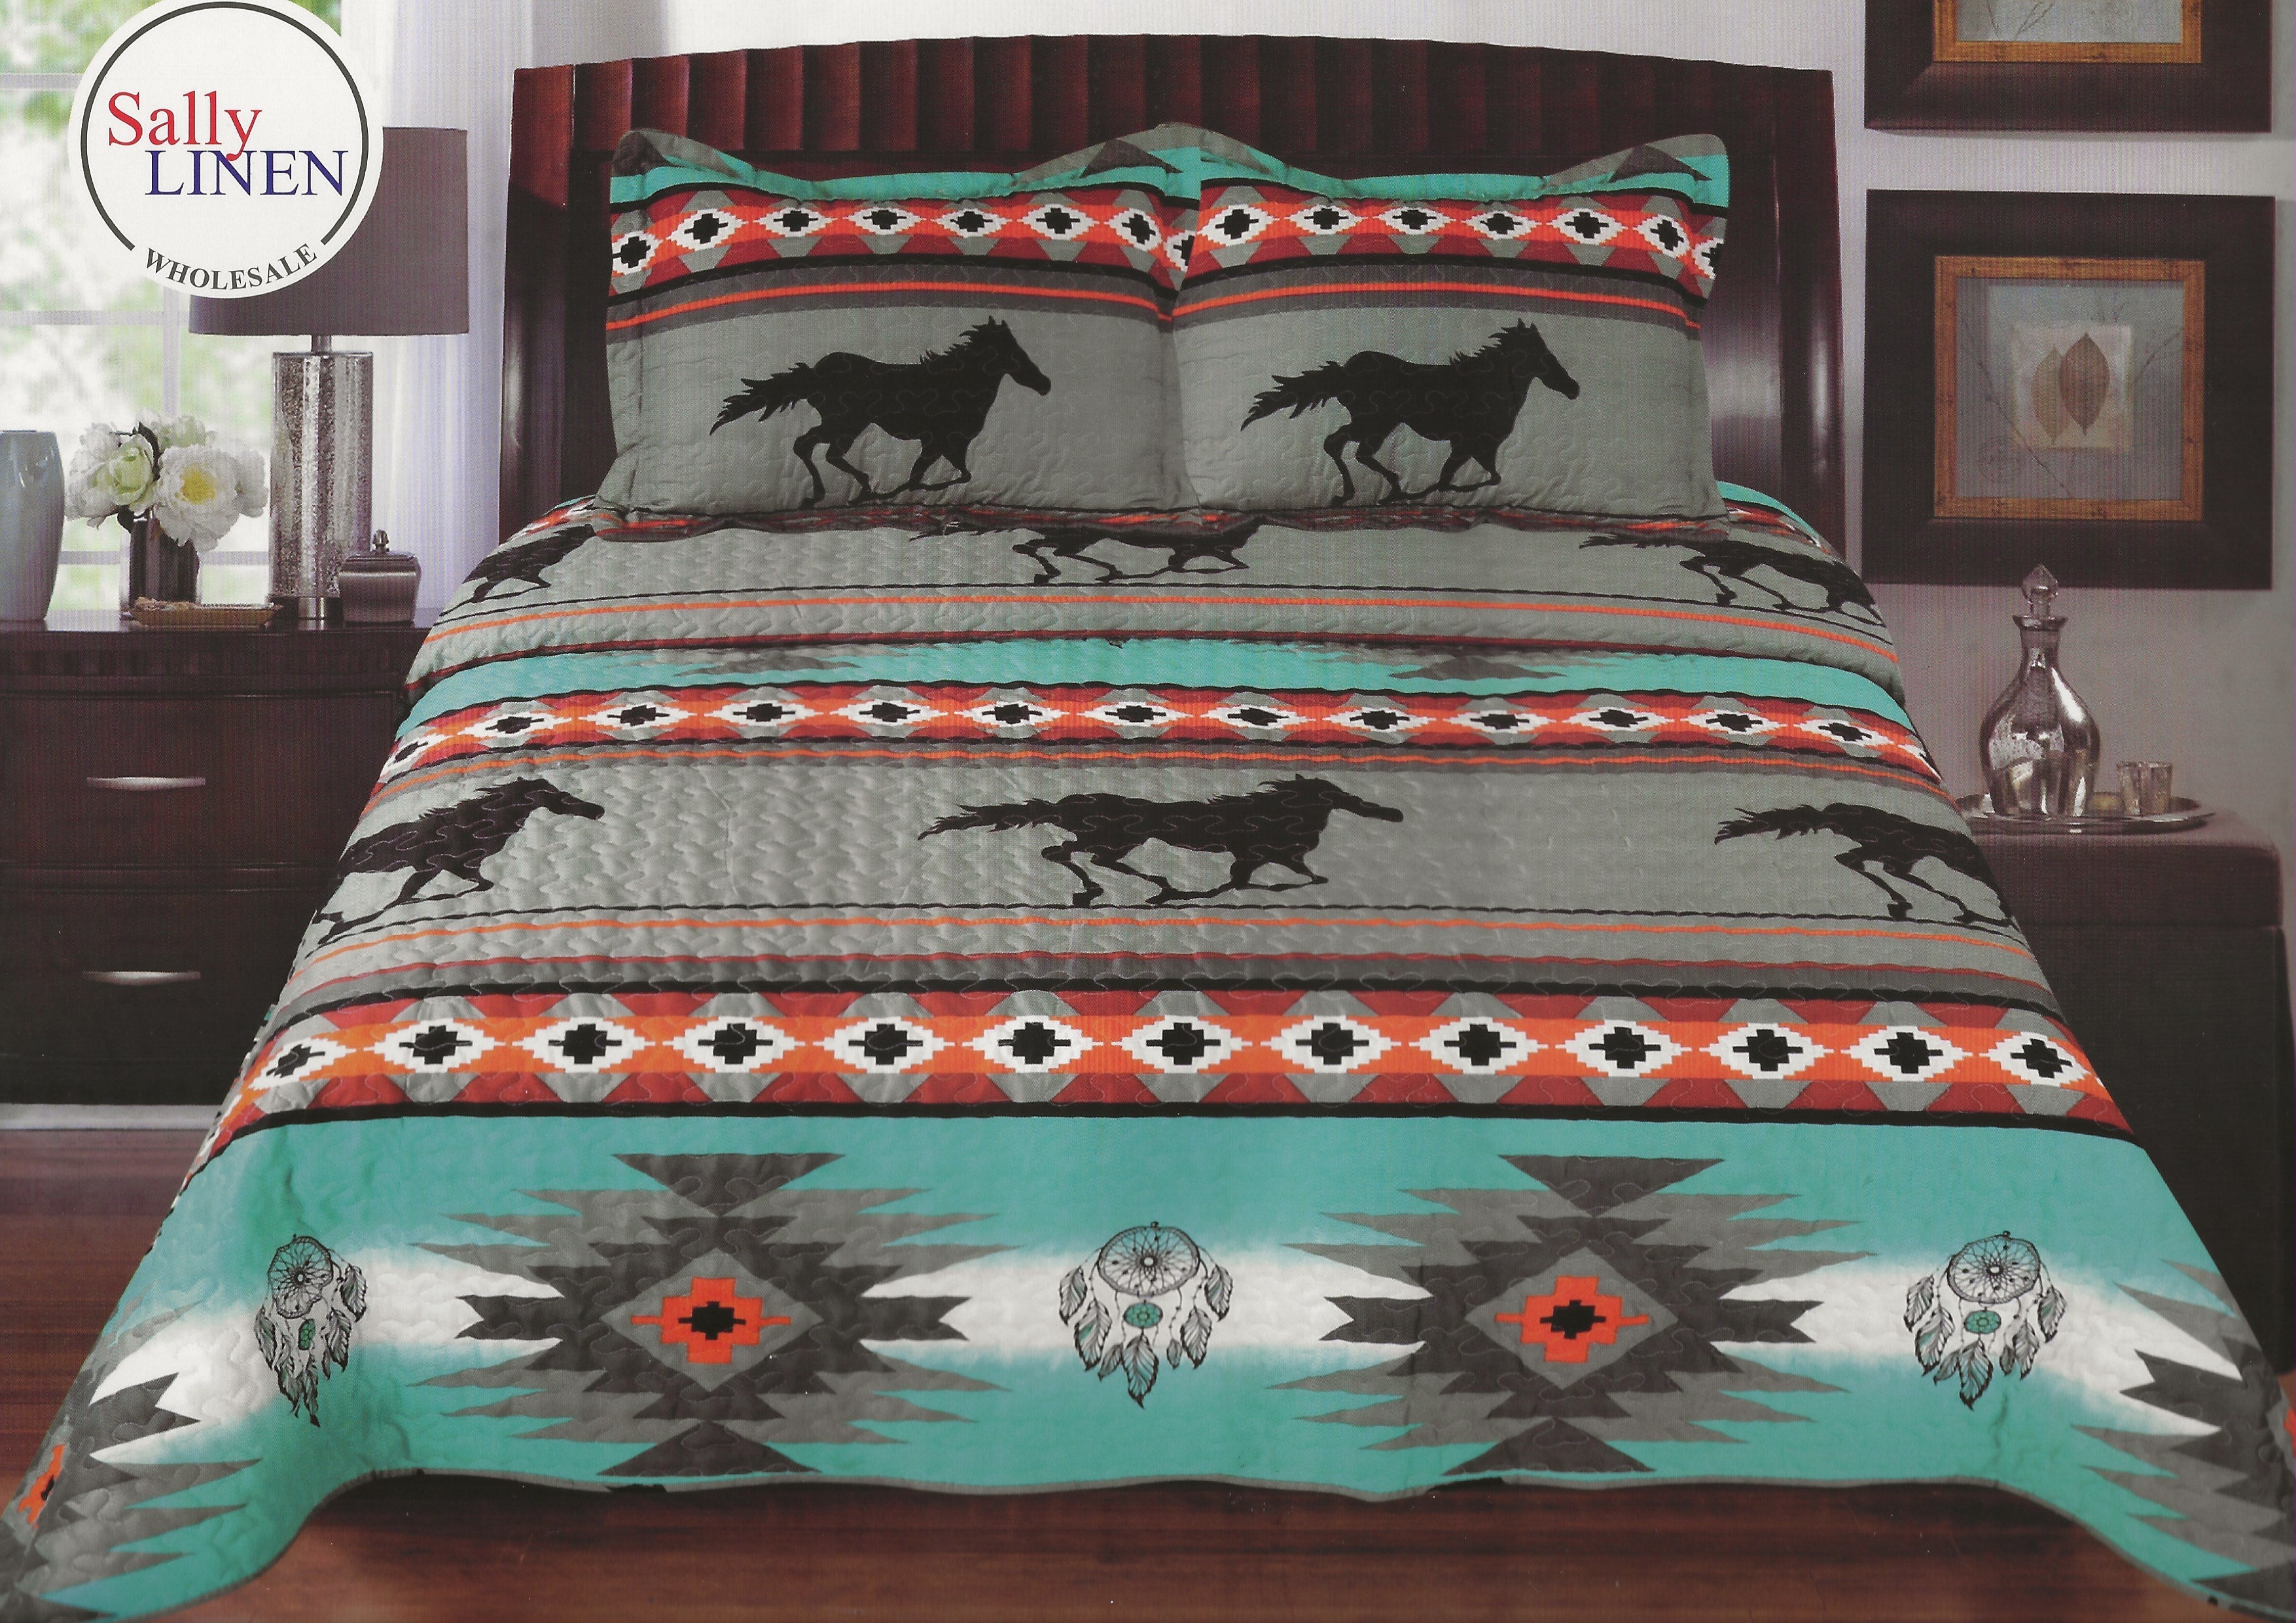 Western Linens wholesale products